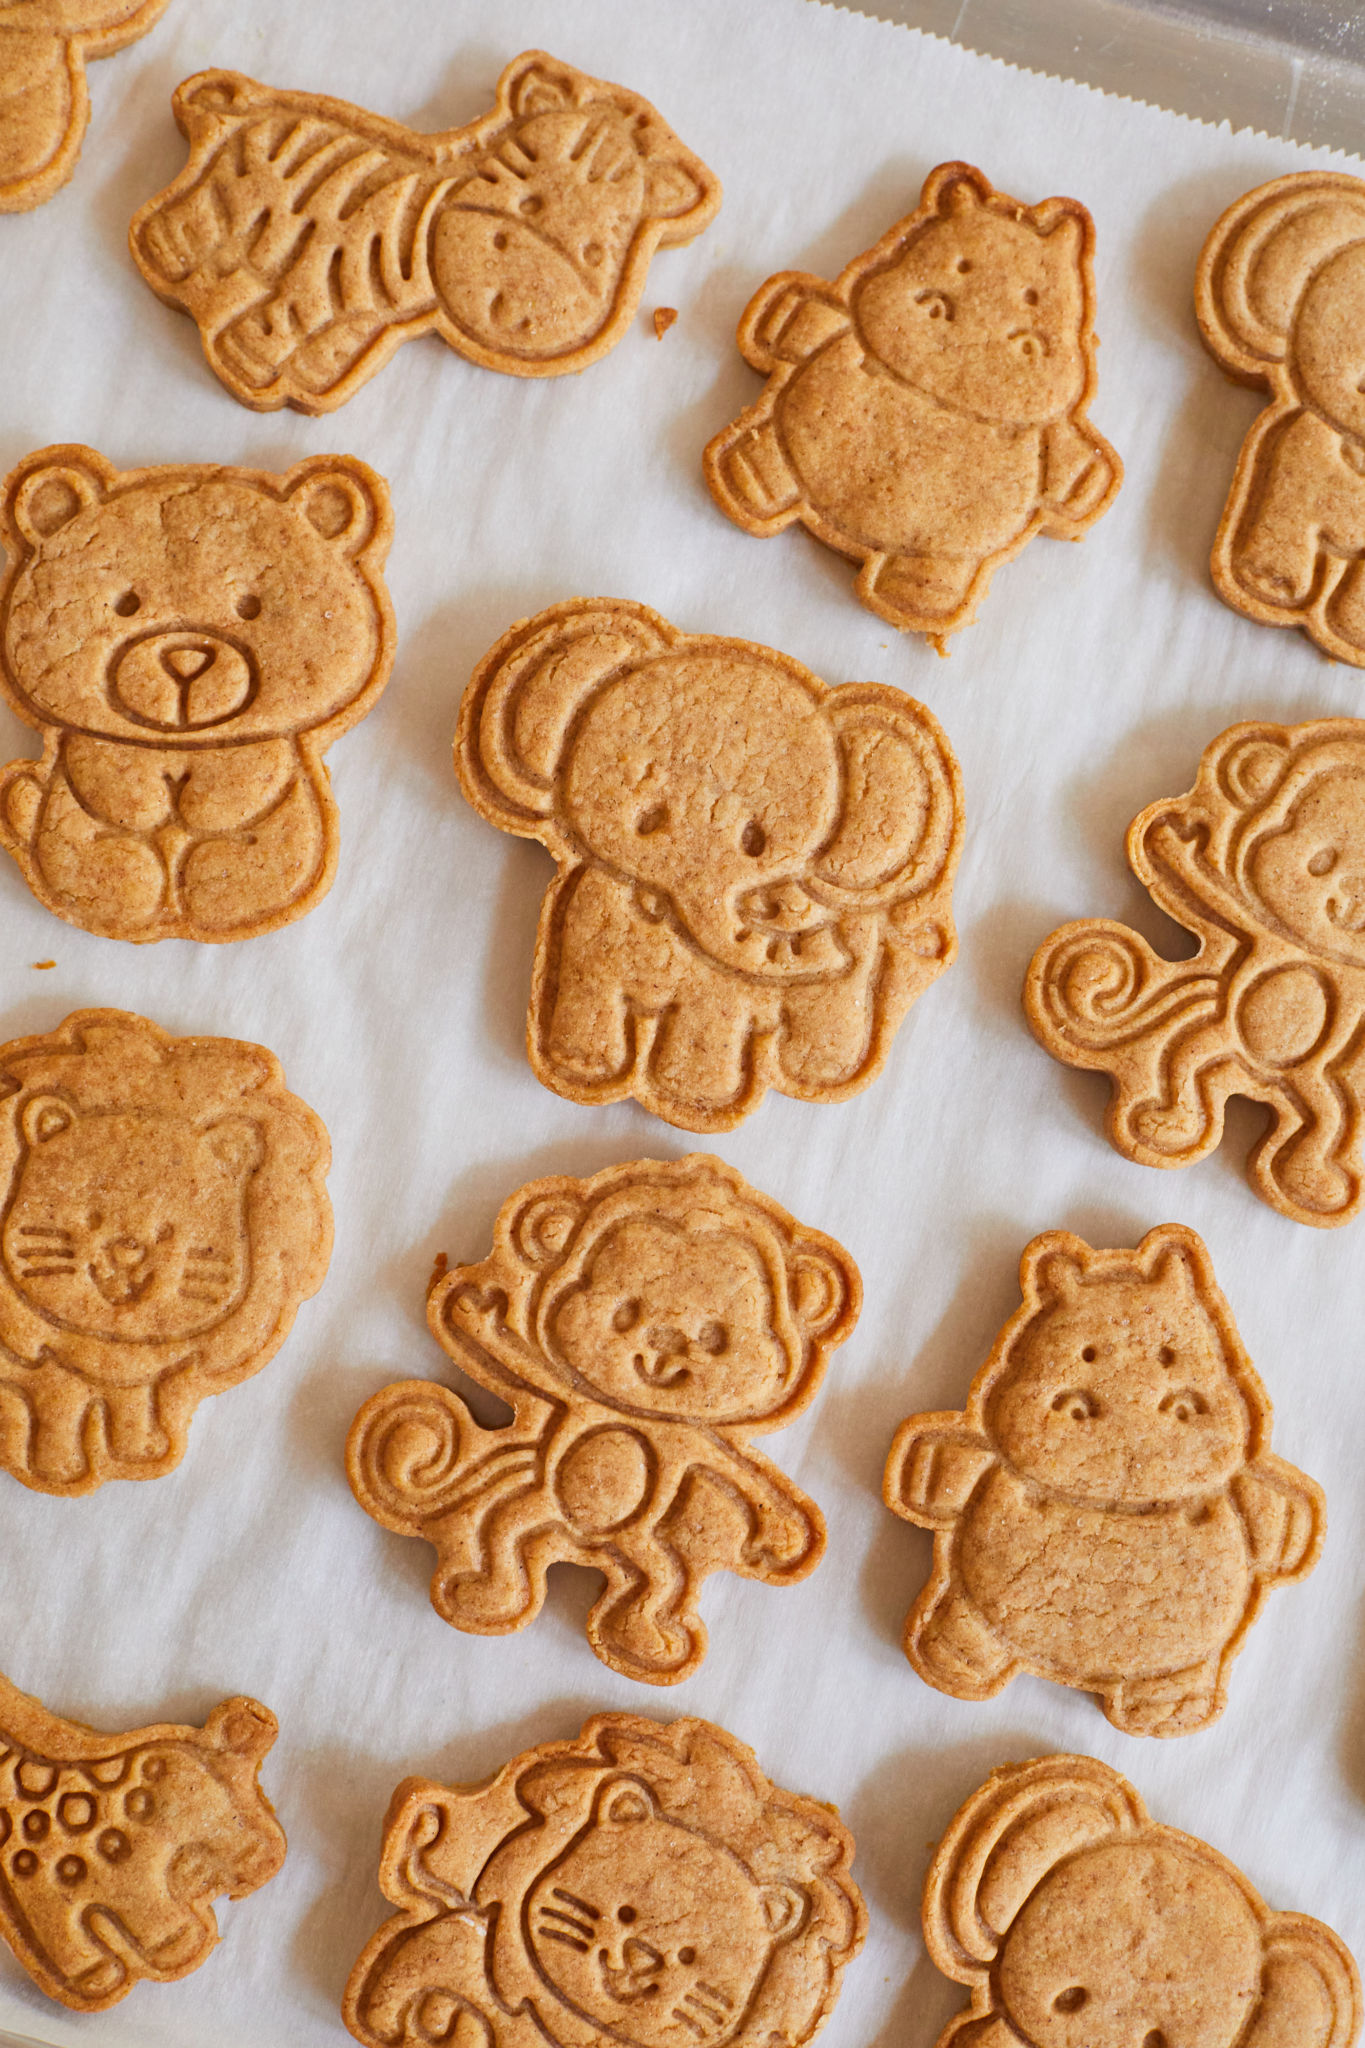 Homemade Animal Crackers are baked perfectly golden brown, cooling on the parchment paper in a baking tray. 